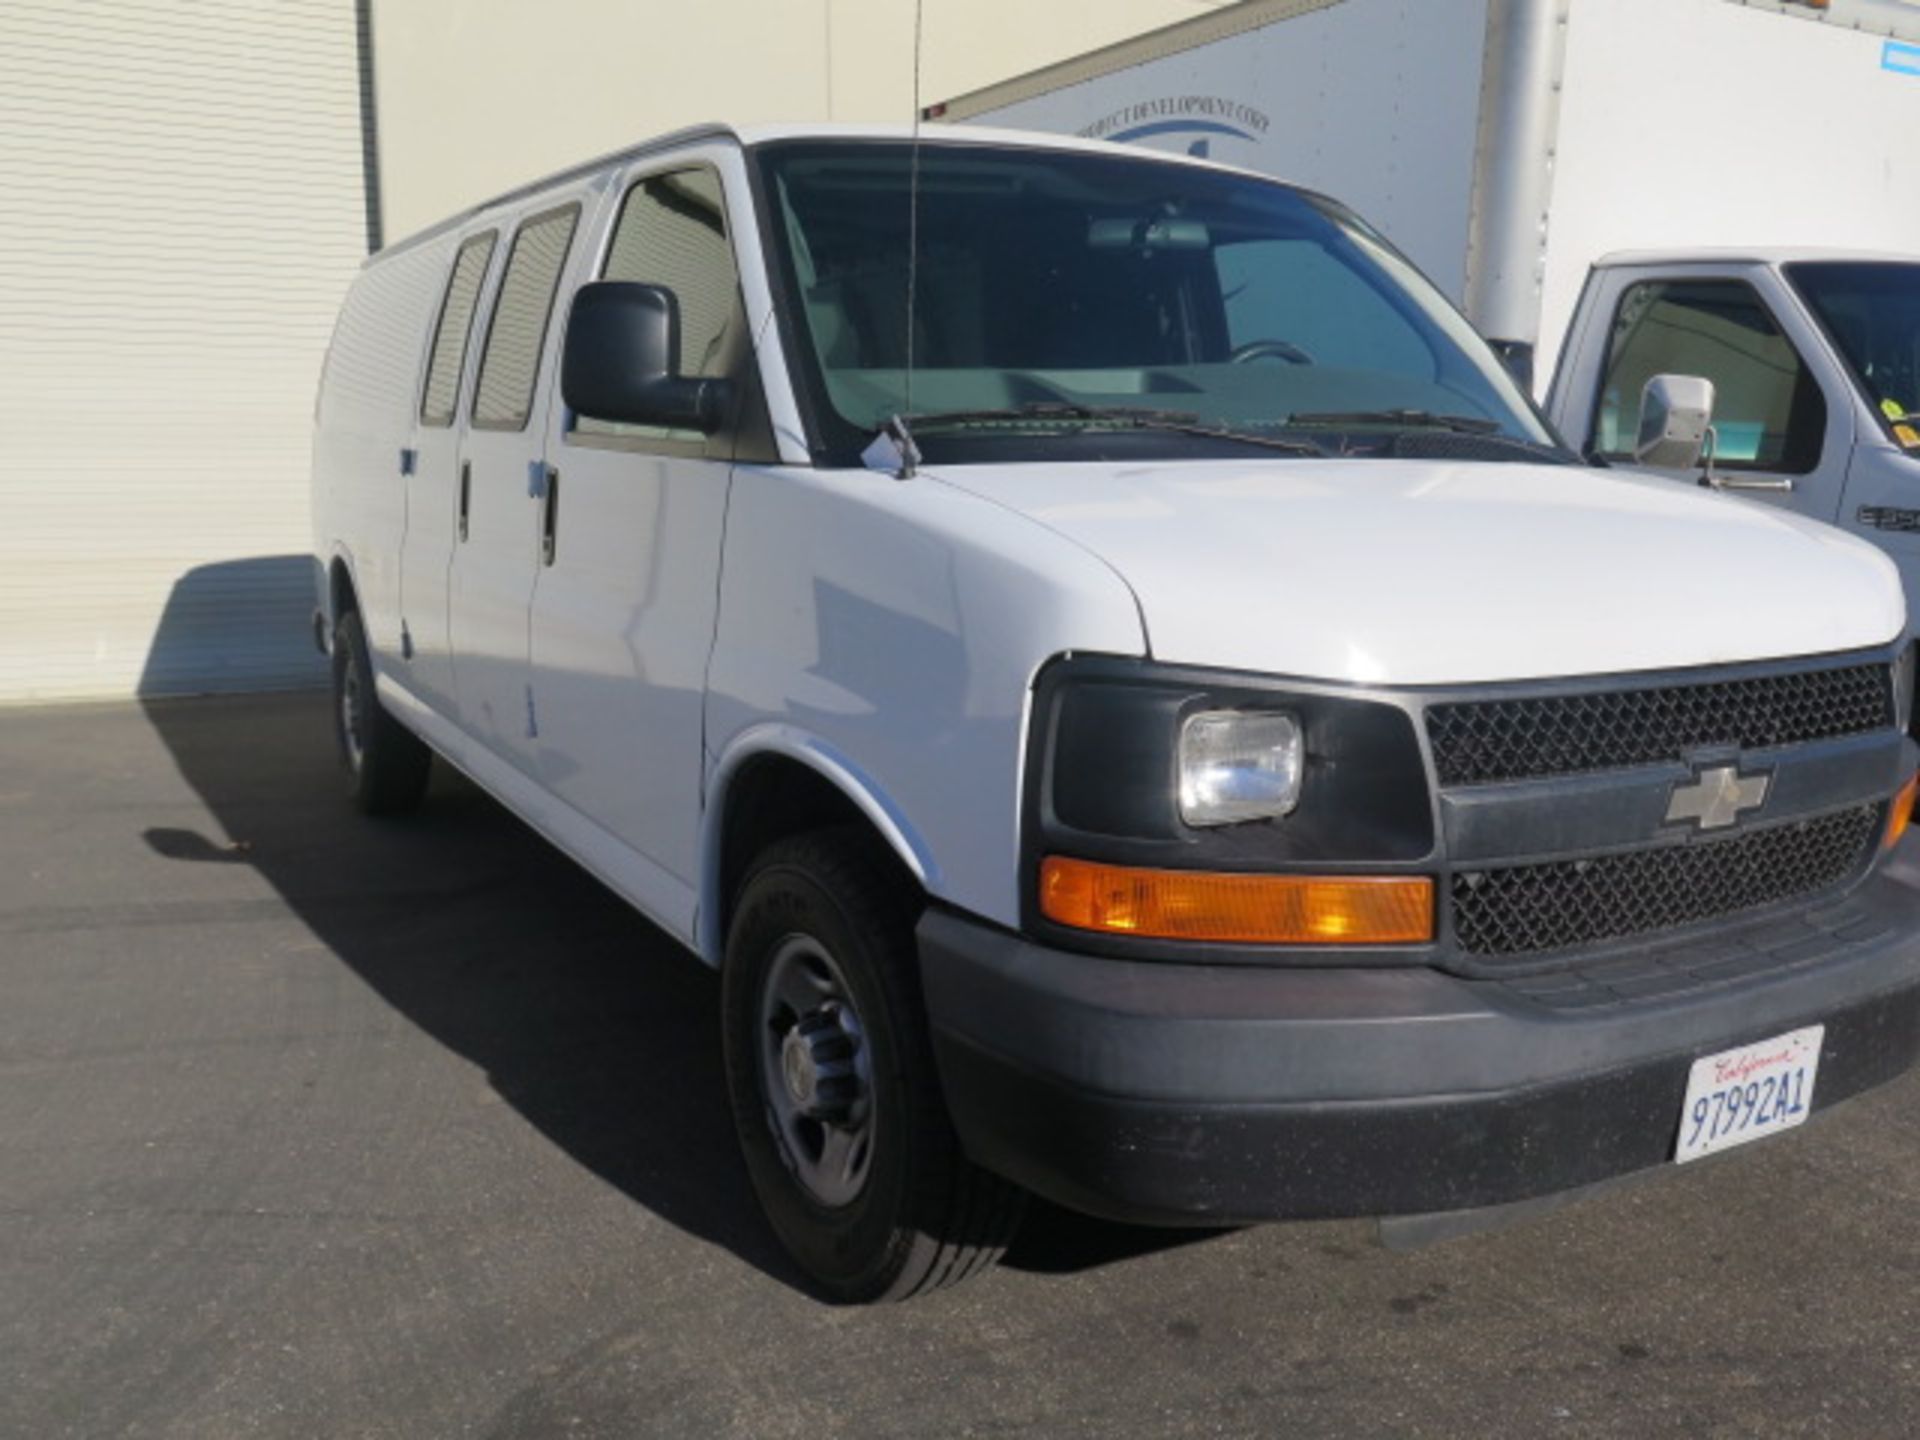 2007 Chevrolet Cargo Van Lisc #97992A1 w/Gas Engine, Auto Trans, AC, 271,713 Miles, SOLD AS IS - Image 5 of 24